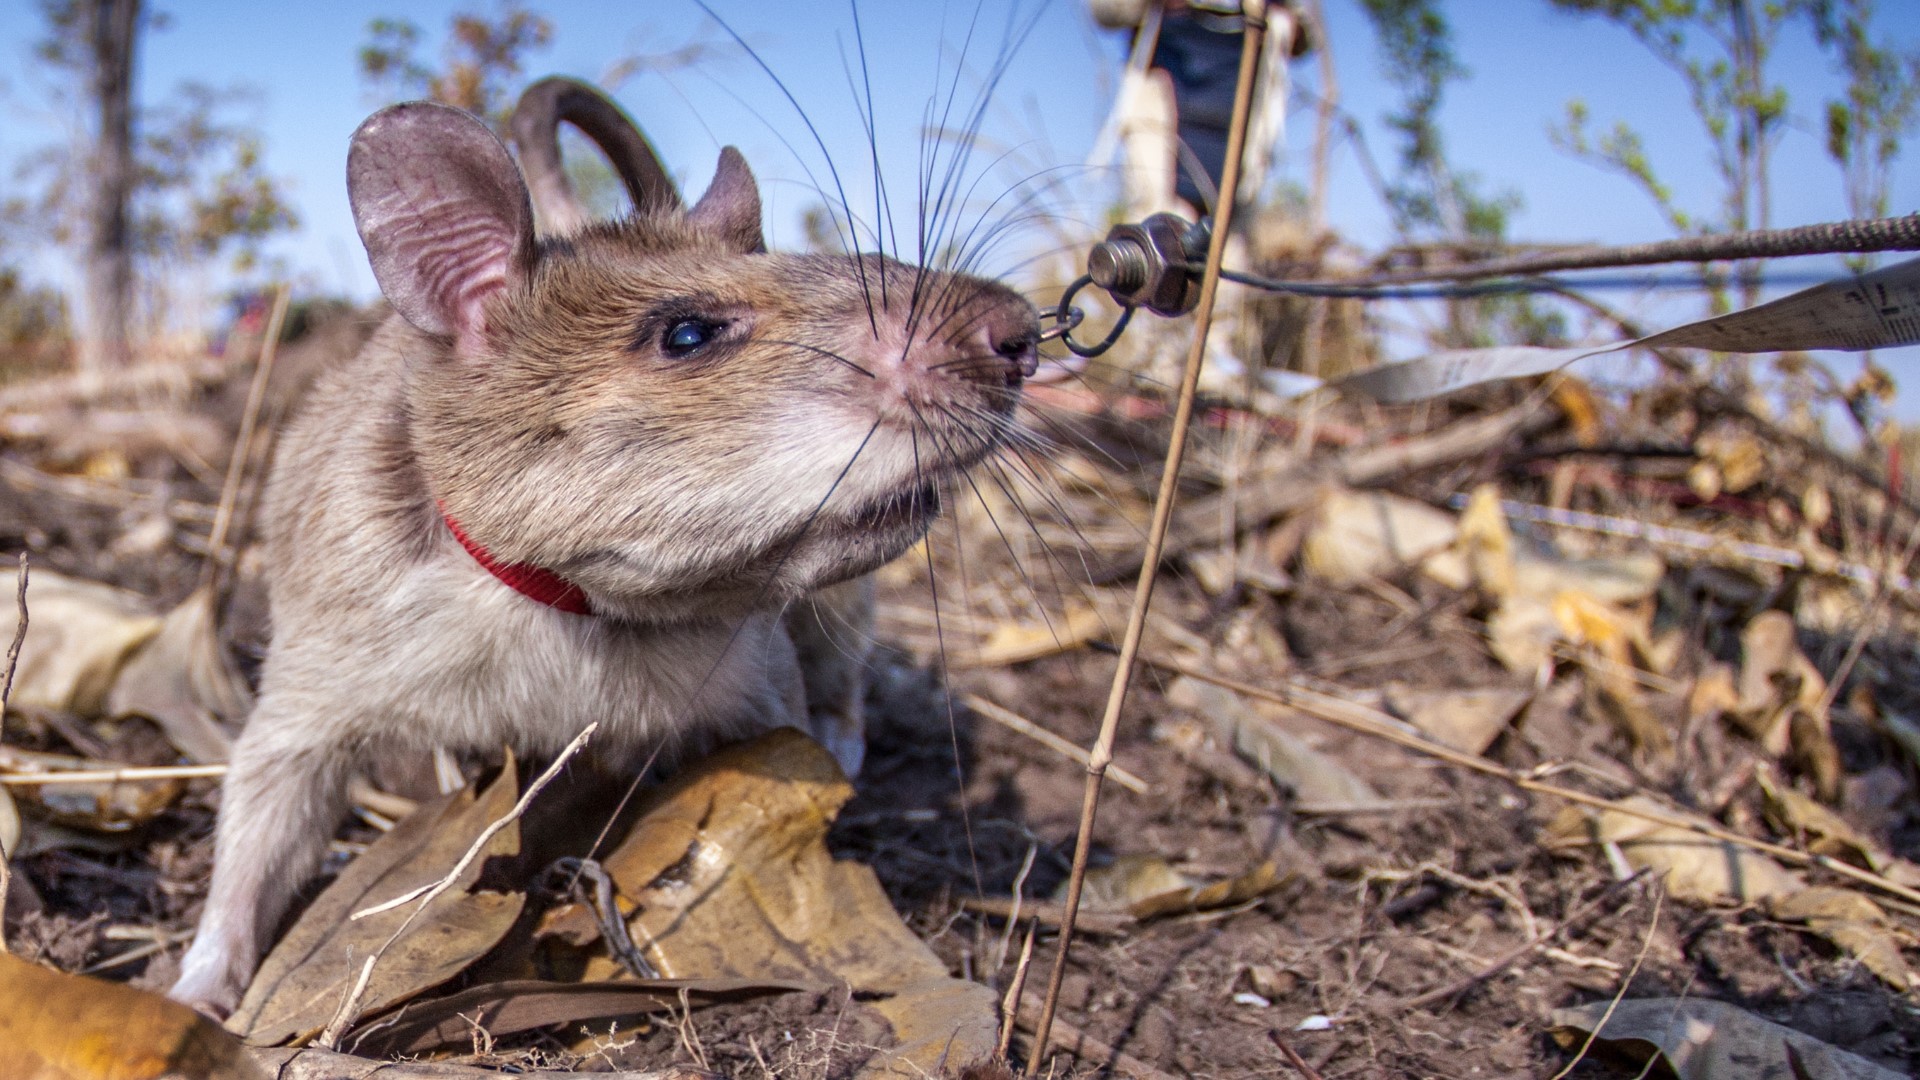 The HeroRATs at Tacoma's Point Defiance Zoo have such strong noses, they can sniff out unexploded landmines and tuberculosis.